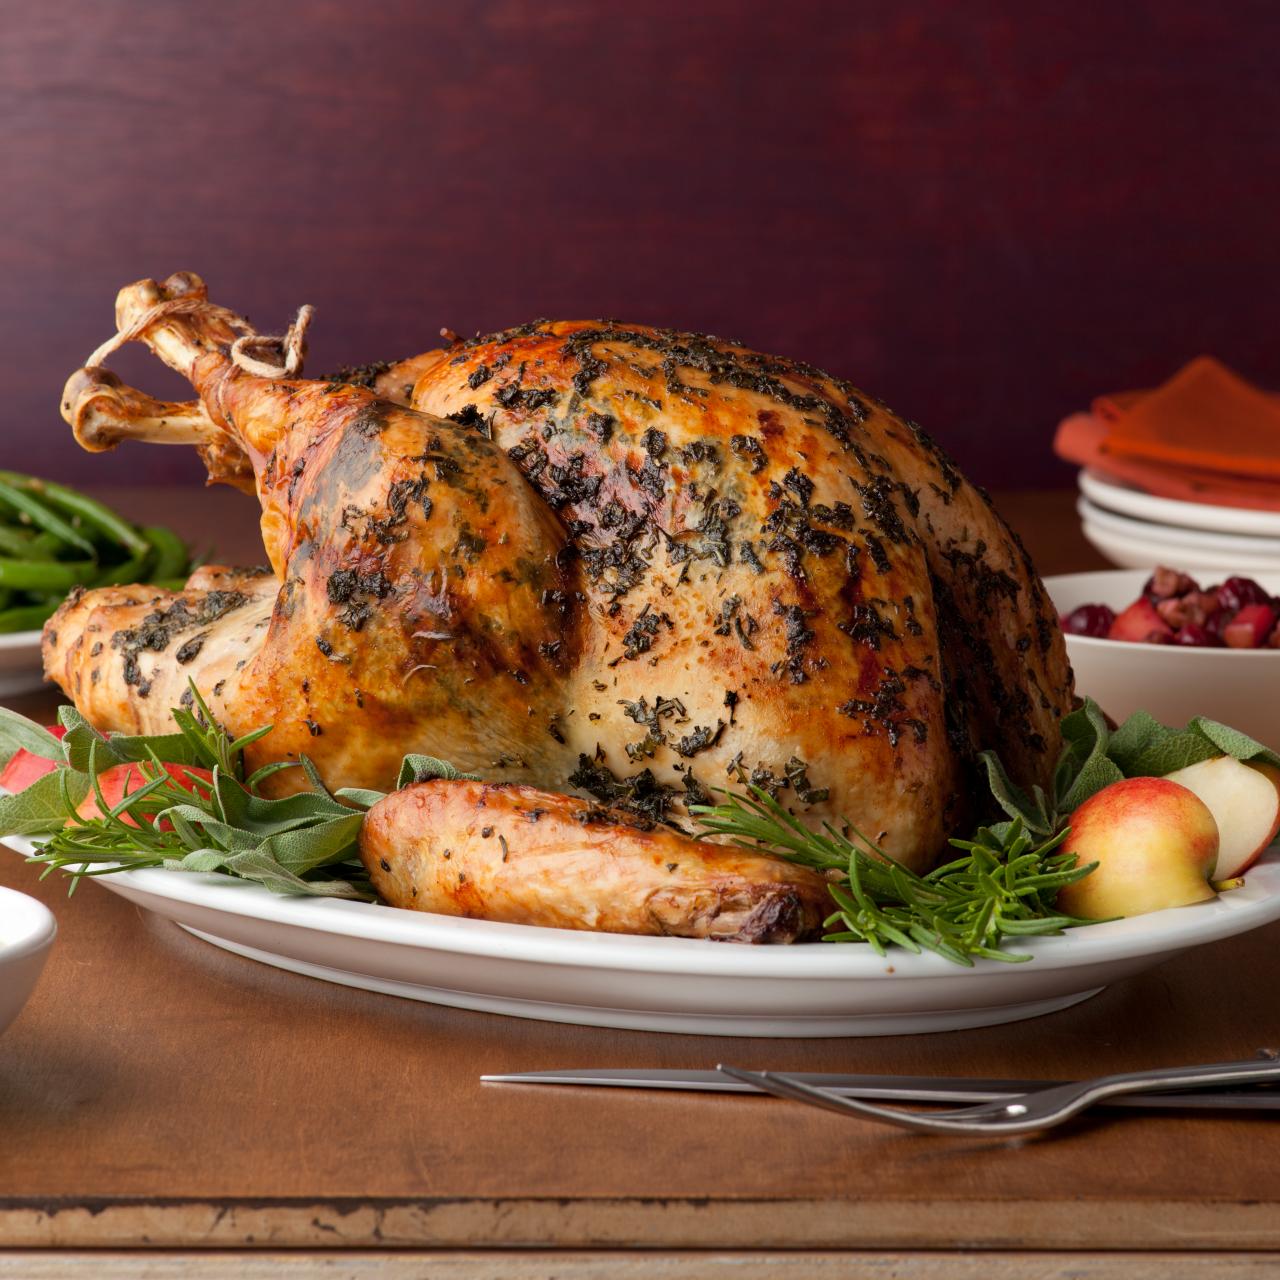 Here's the ultimate Food & Wine Thanksgiving guide.